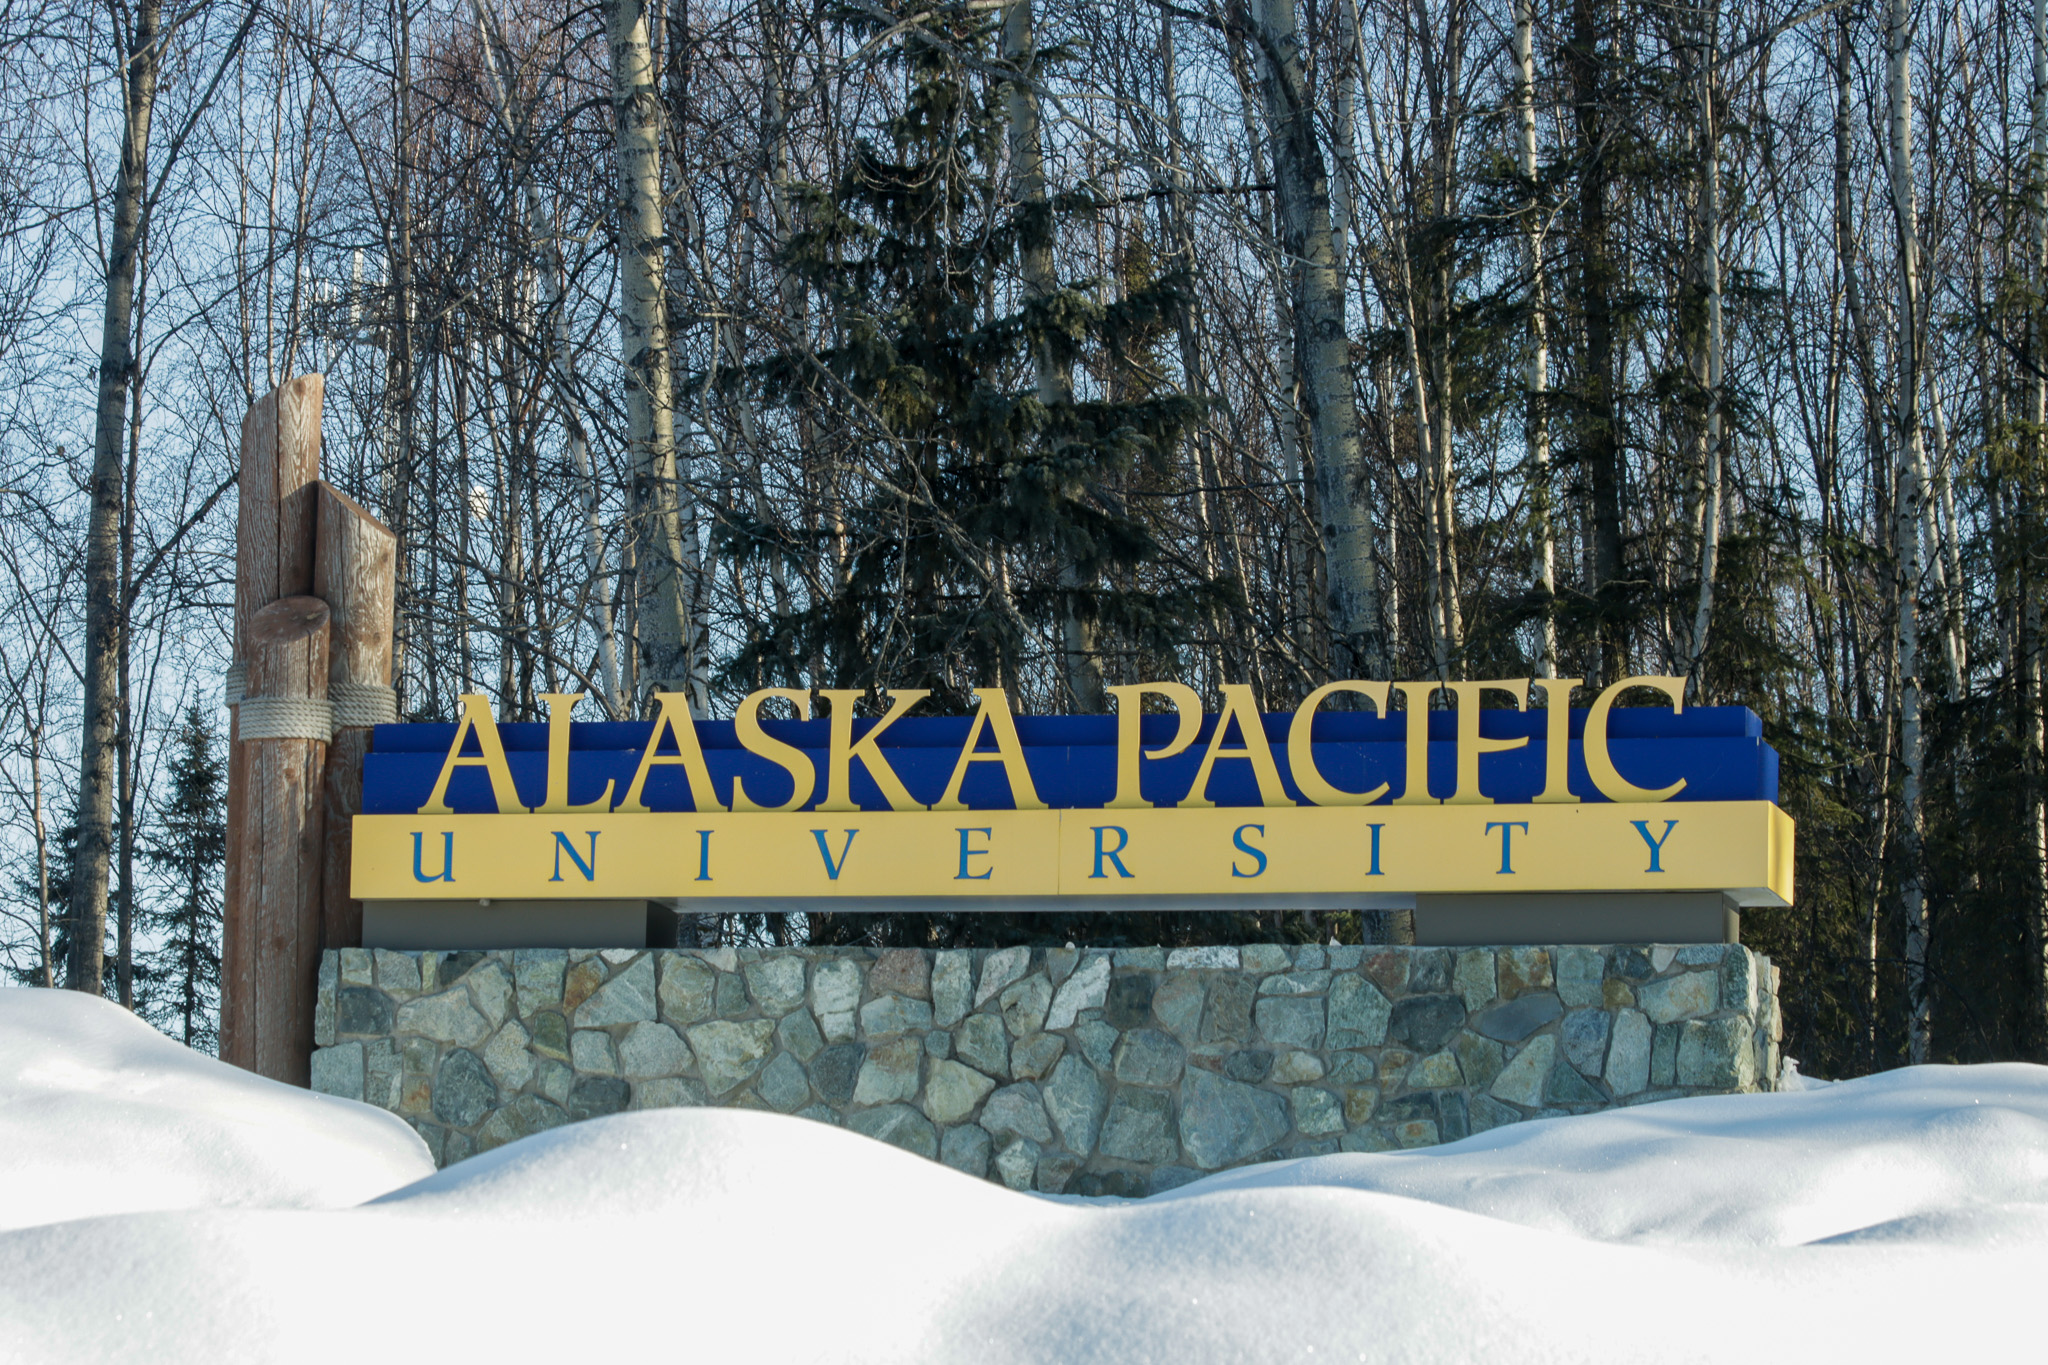 The sign for Alaska Pacific University stands in front of pine trees surrounded by snow.